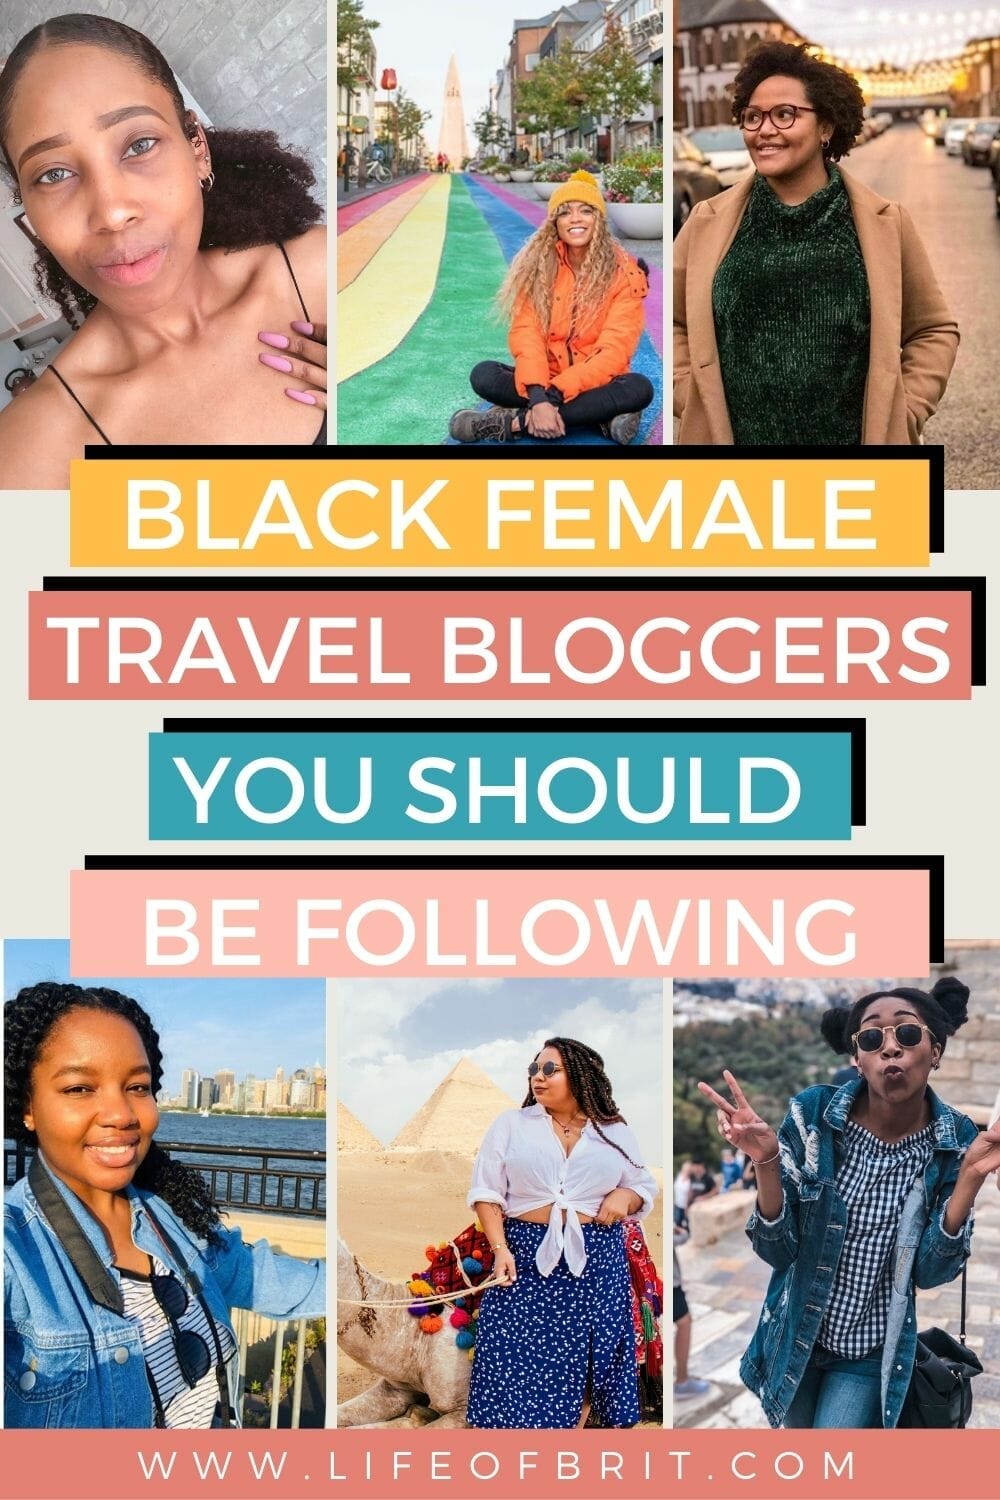 Black Female Travel Bloggers You Should be Following